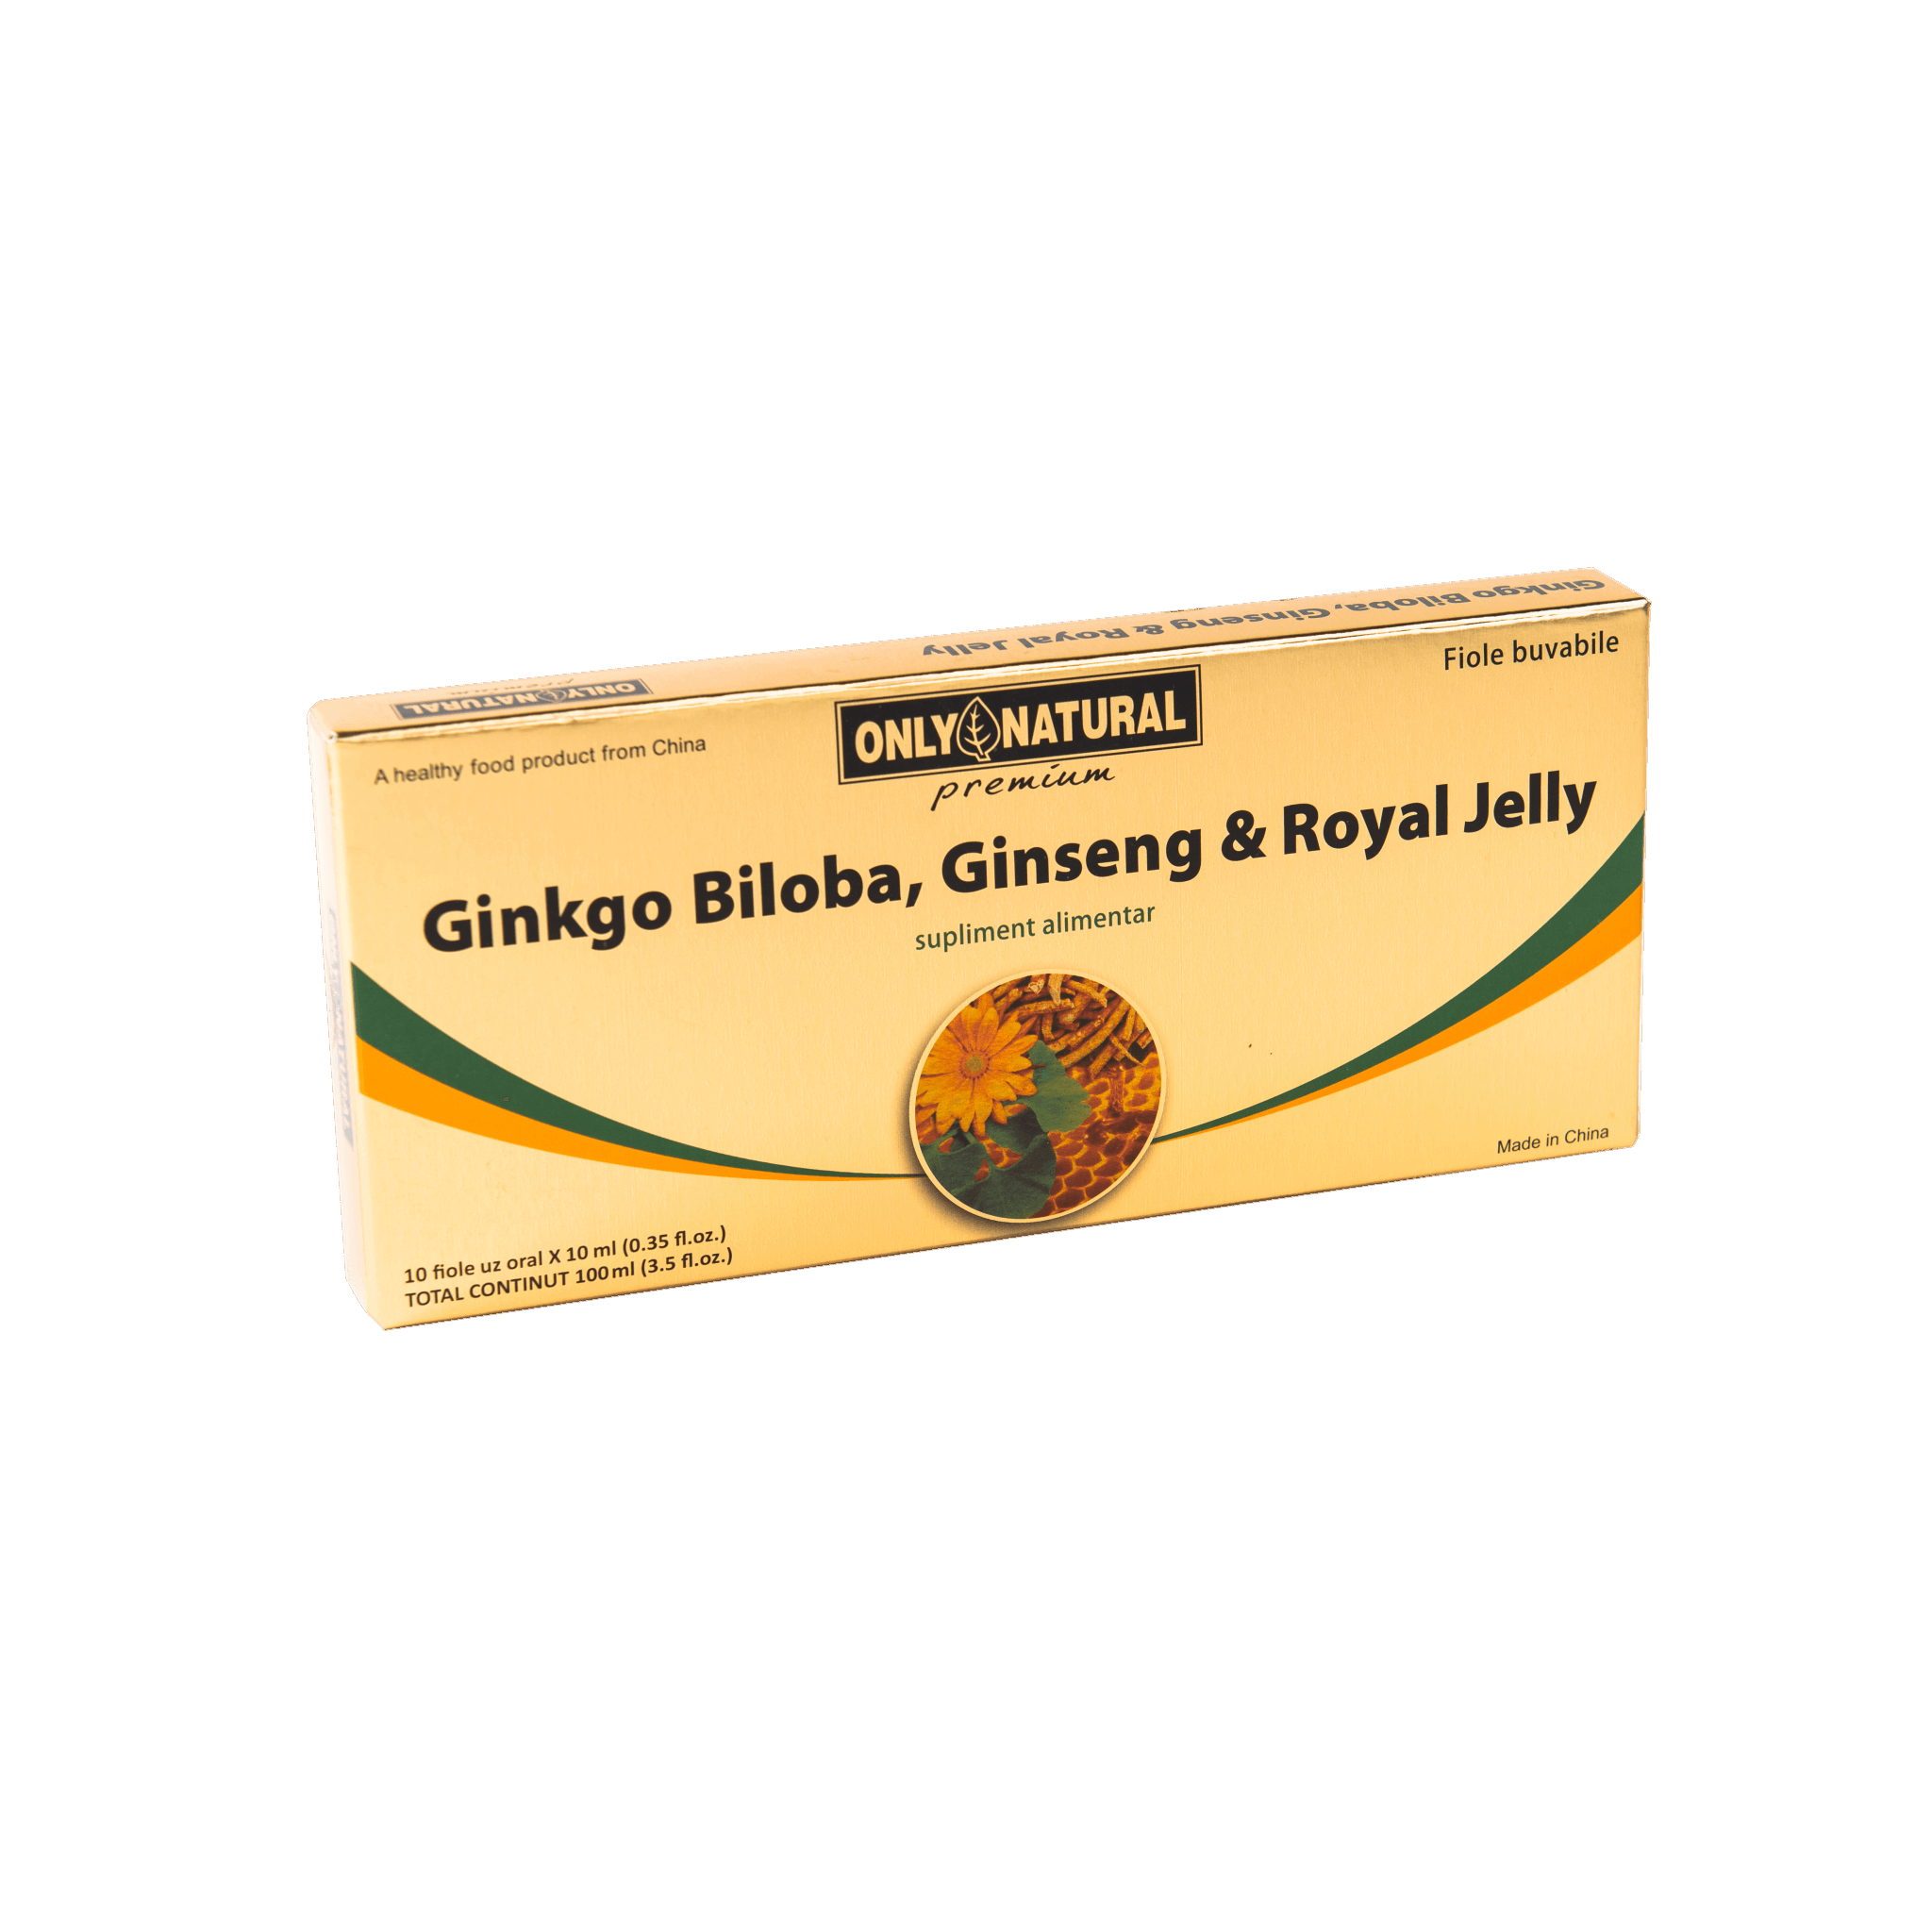 ONLY NATURAL GINKGO BILOBA + GINSENG + ROYAL JELLY 10 FIOLE X 10ML